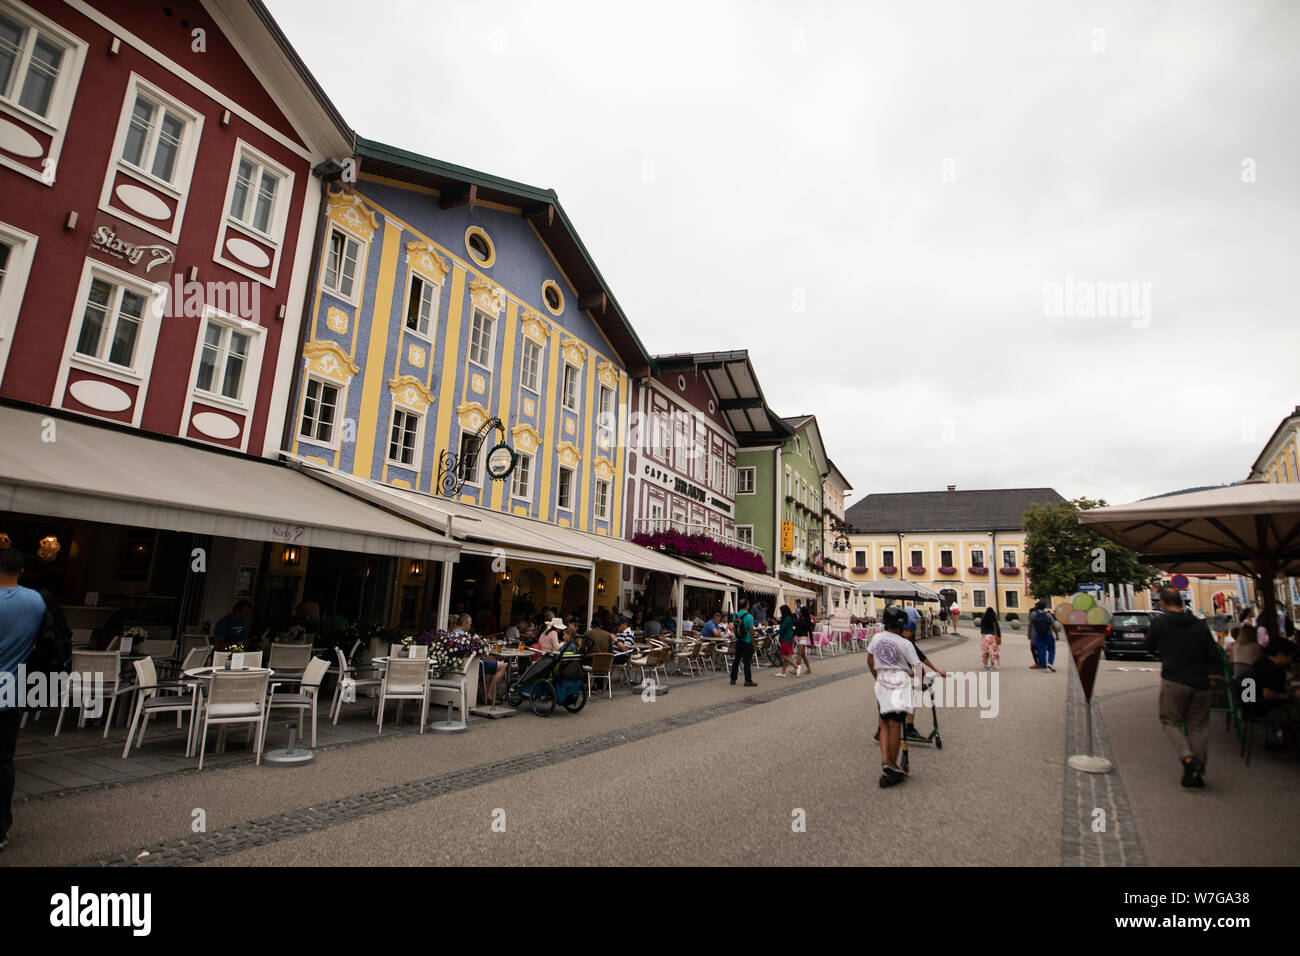 Restaurants, cafes and shops line the Marktplatz (main market square) in the town of Mondsee, Austria. Stock Photo